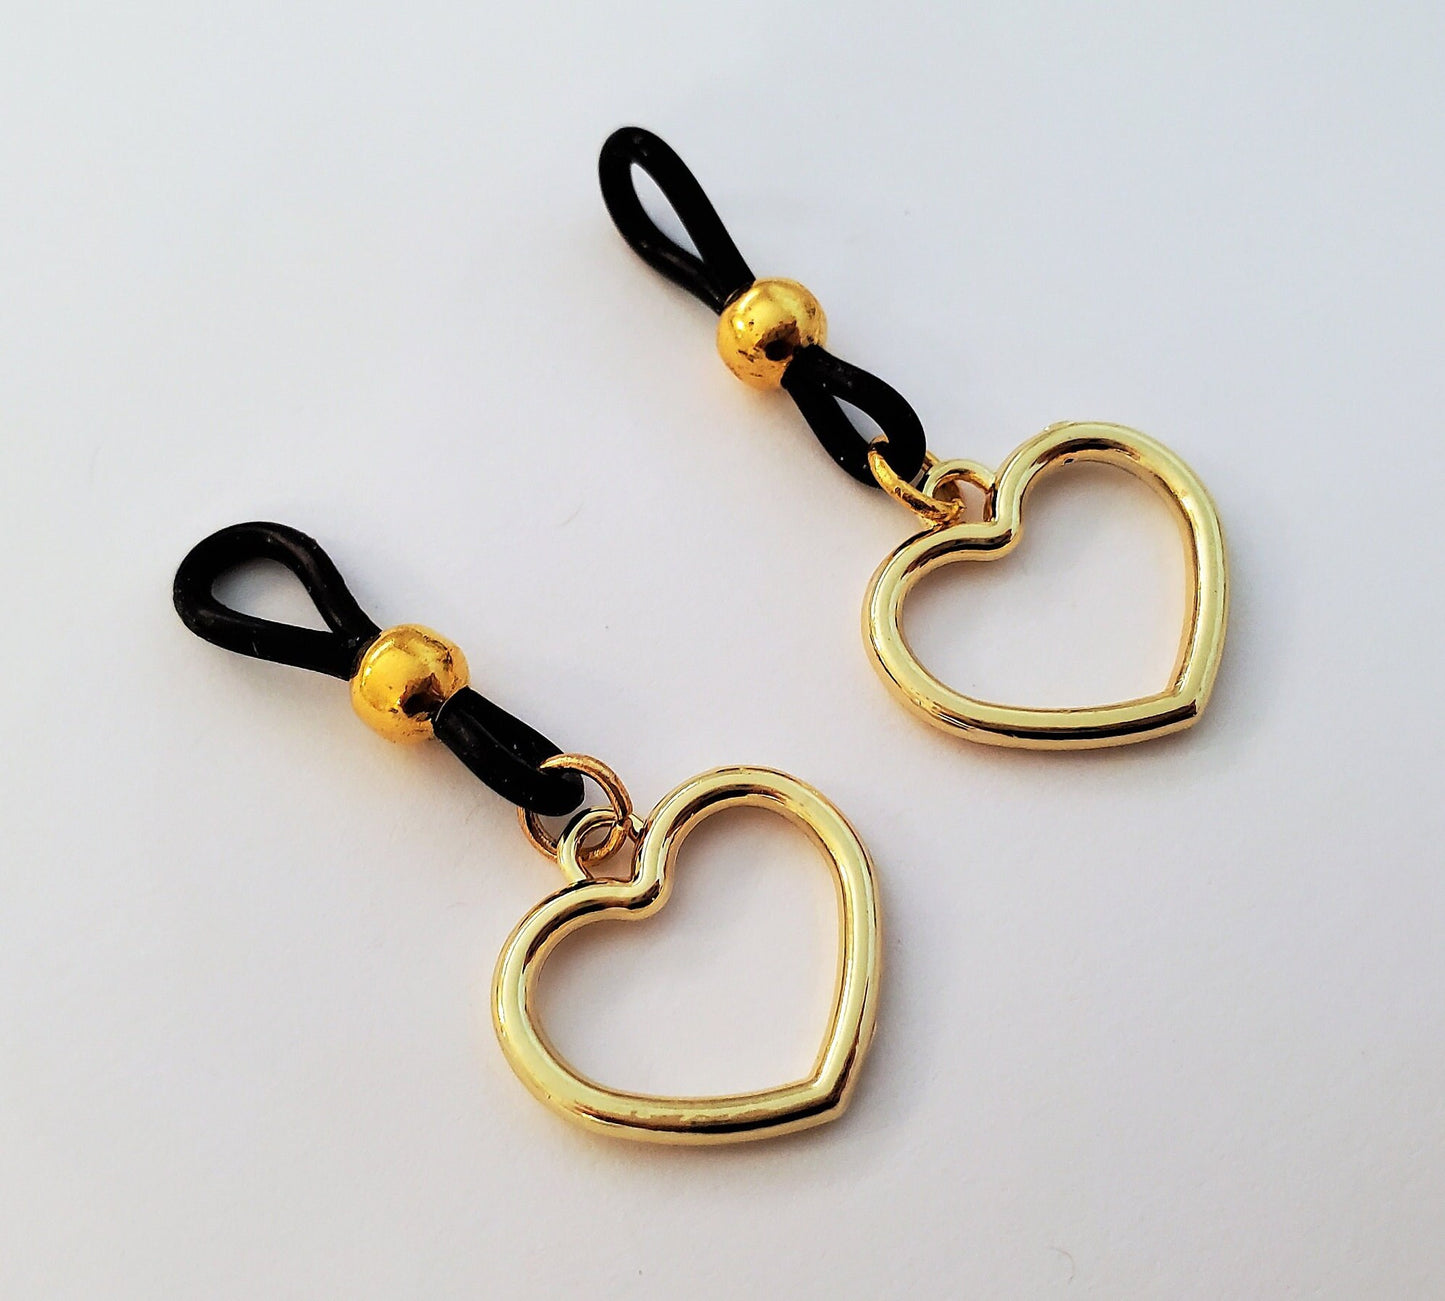 Nipple Rings Jewelry Set Sexy Non-Piercing Nipple Noose Clamp Gold Heart Body Art Dangle Lingerie Fetish BDSM Mature Erotic Adult Toys